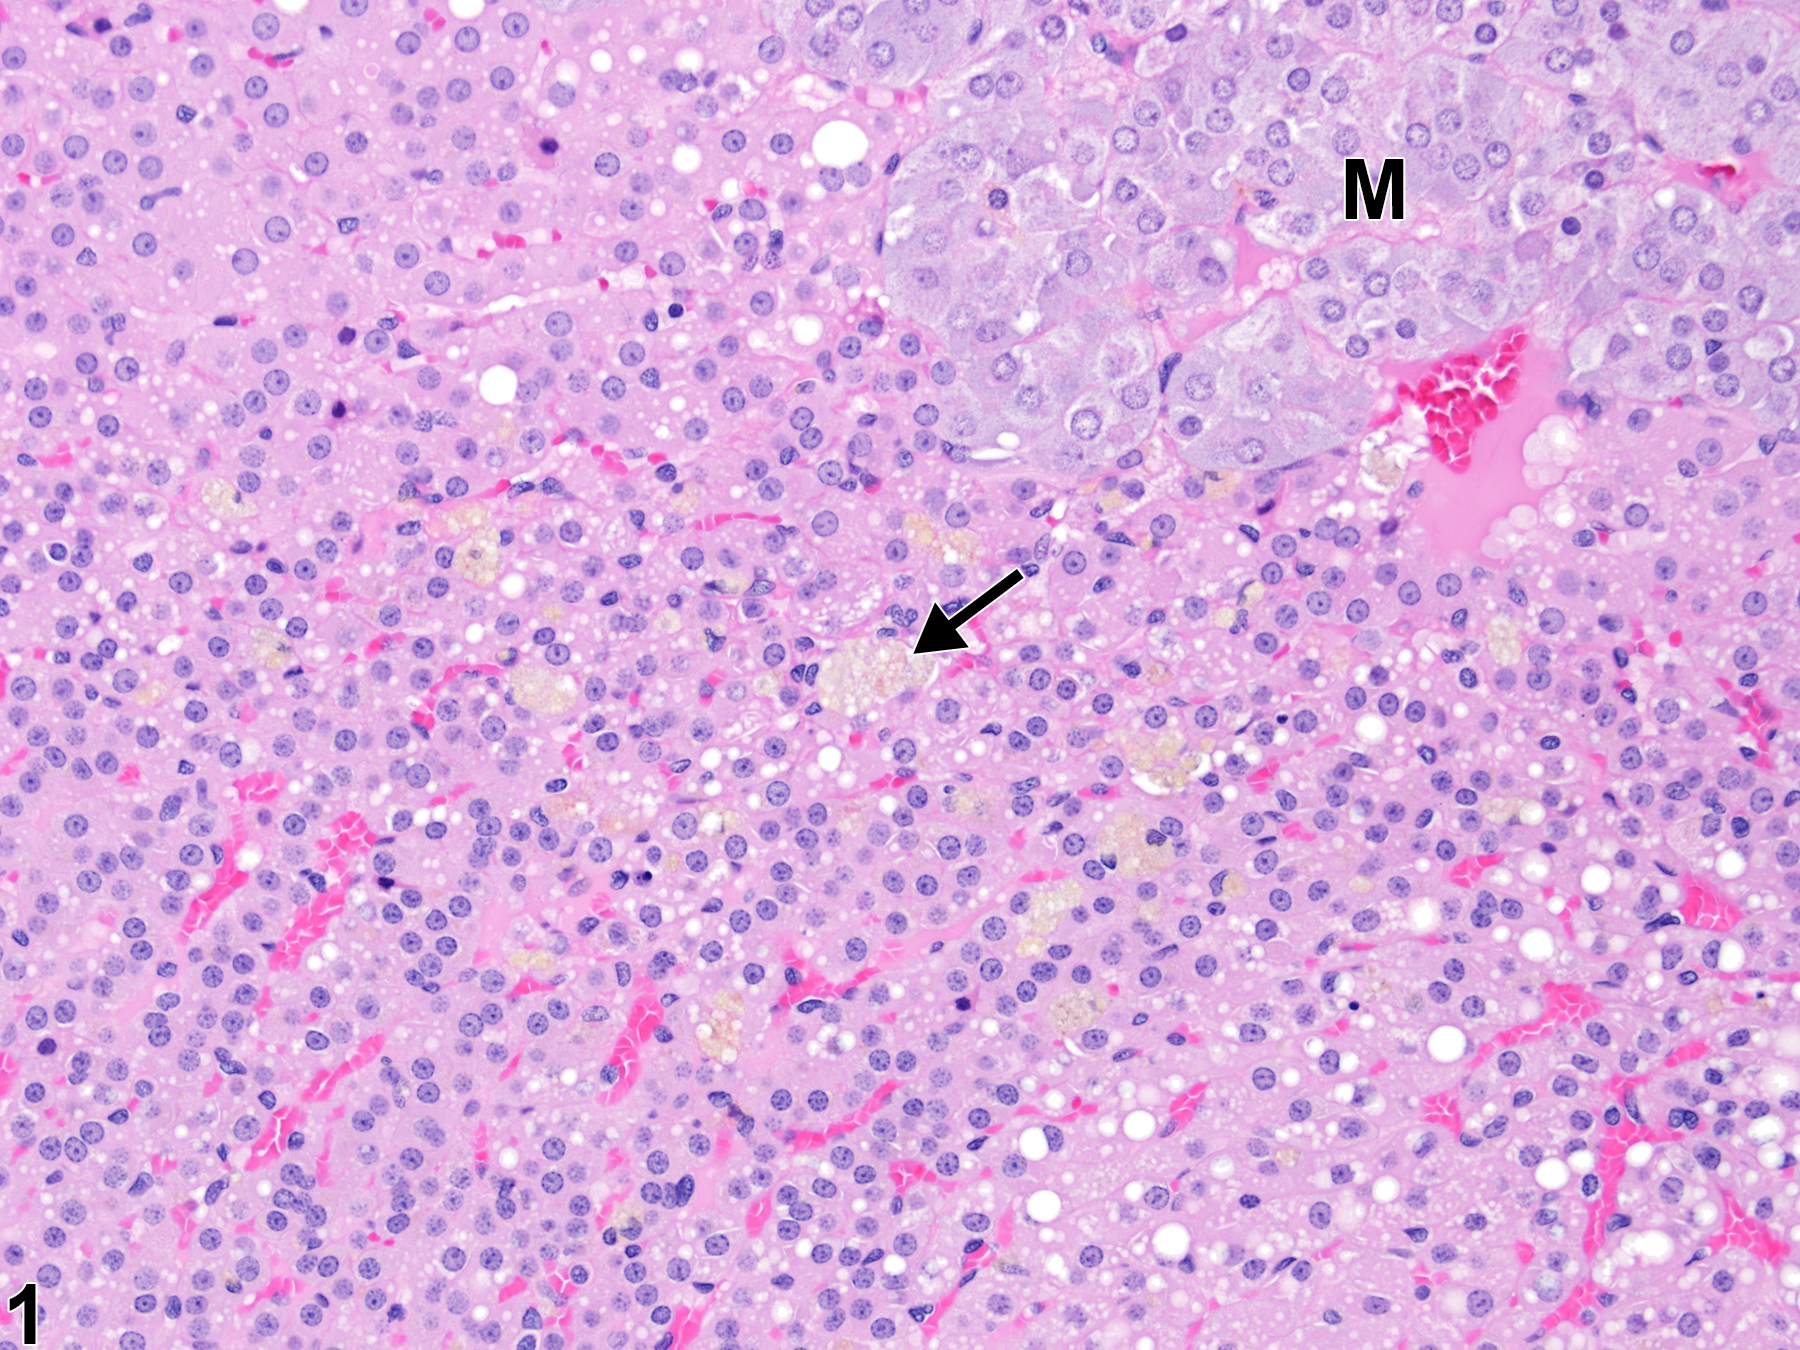 Image of pigment in the adrenal gland cortex from a male F344/N rat in a chronic study